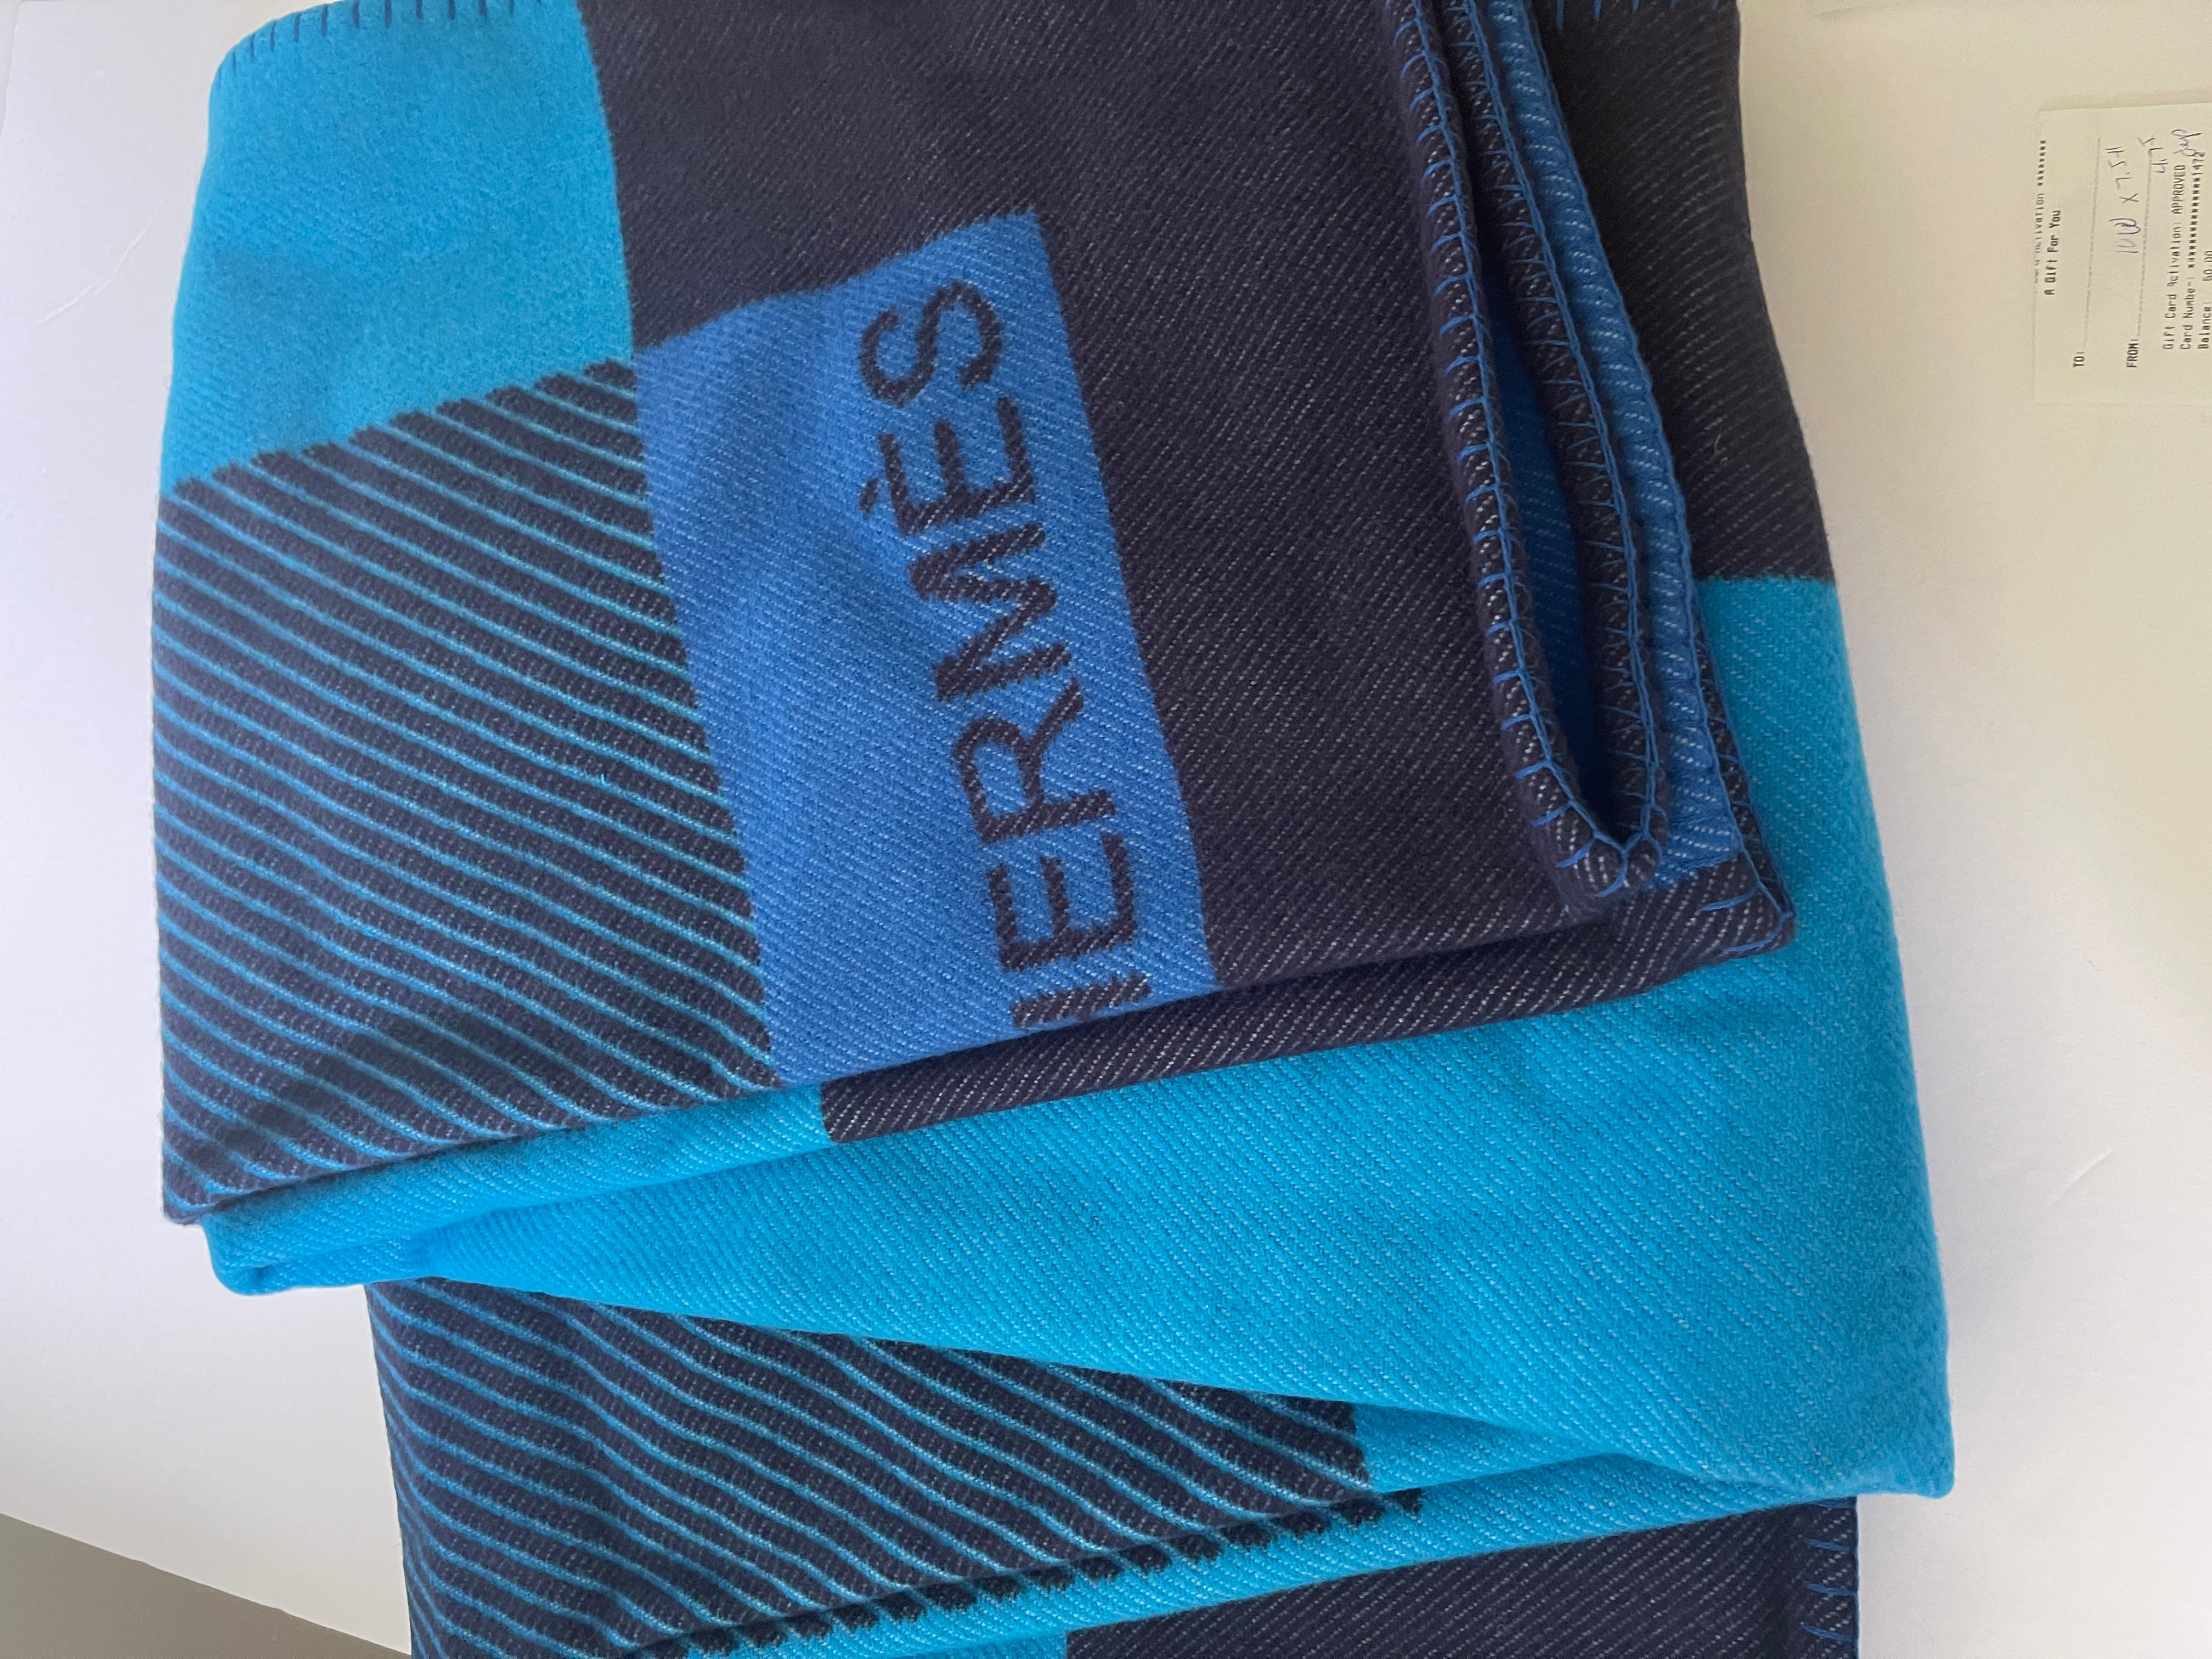 CONDITION
New With Tags

DESCRIPTION
Hermes Blanket in jacquard woven wool and cashmere (90% Merinos wool and 10% cashmere)
Finished with blanket stitch

Made in Scotland

Designed by Hermes Studio
Brand New in Hermes Box





Color: Blue paon
